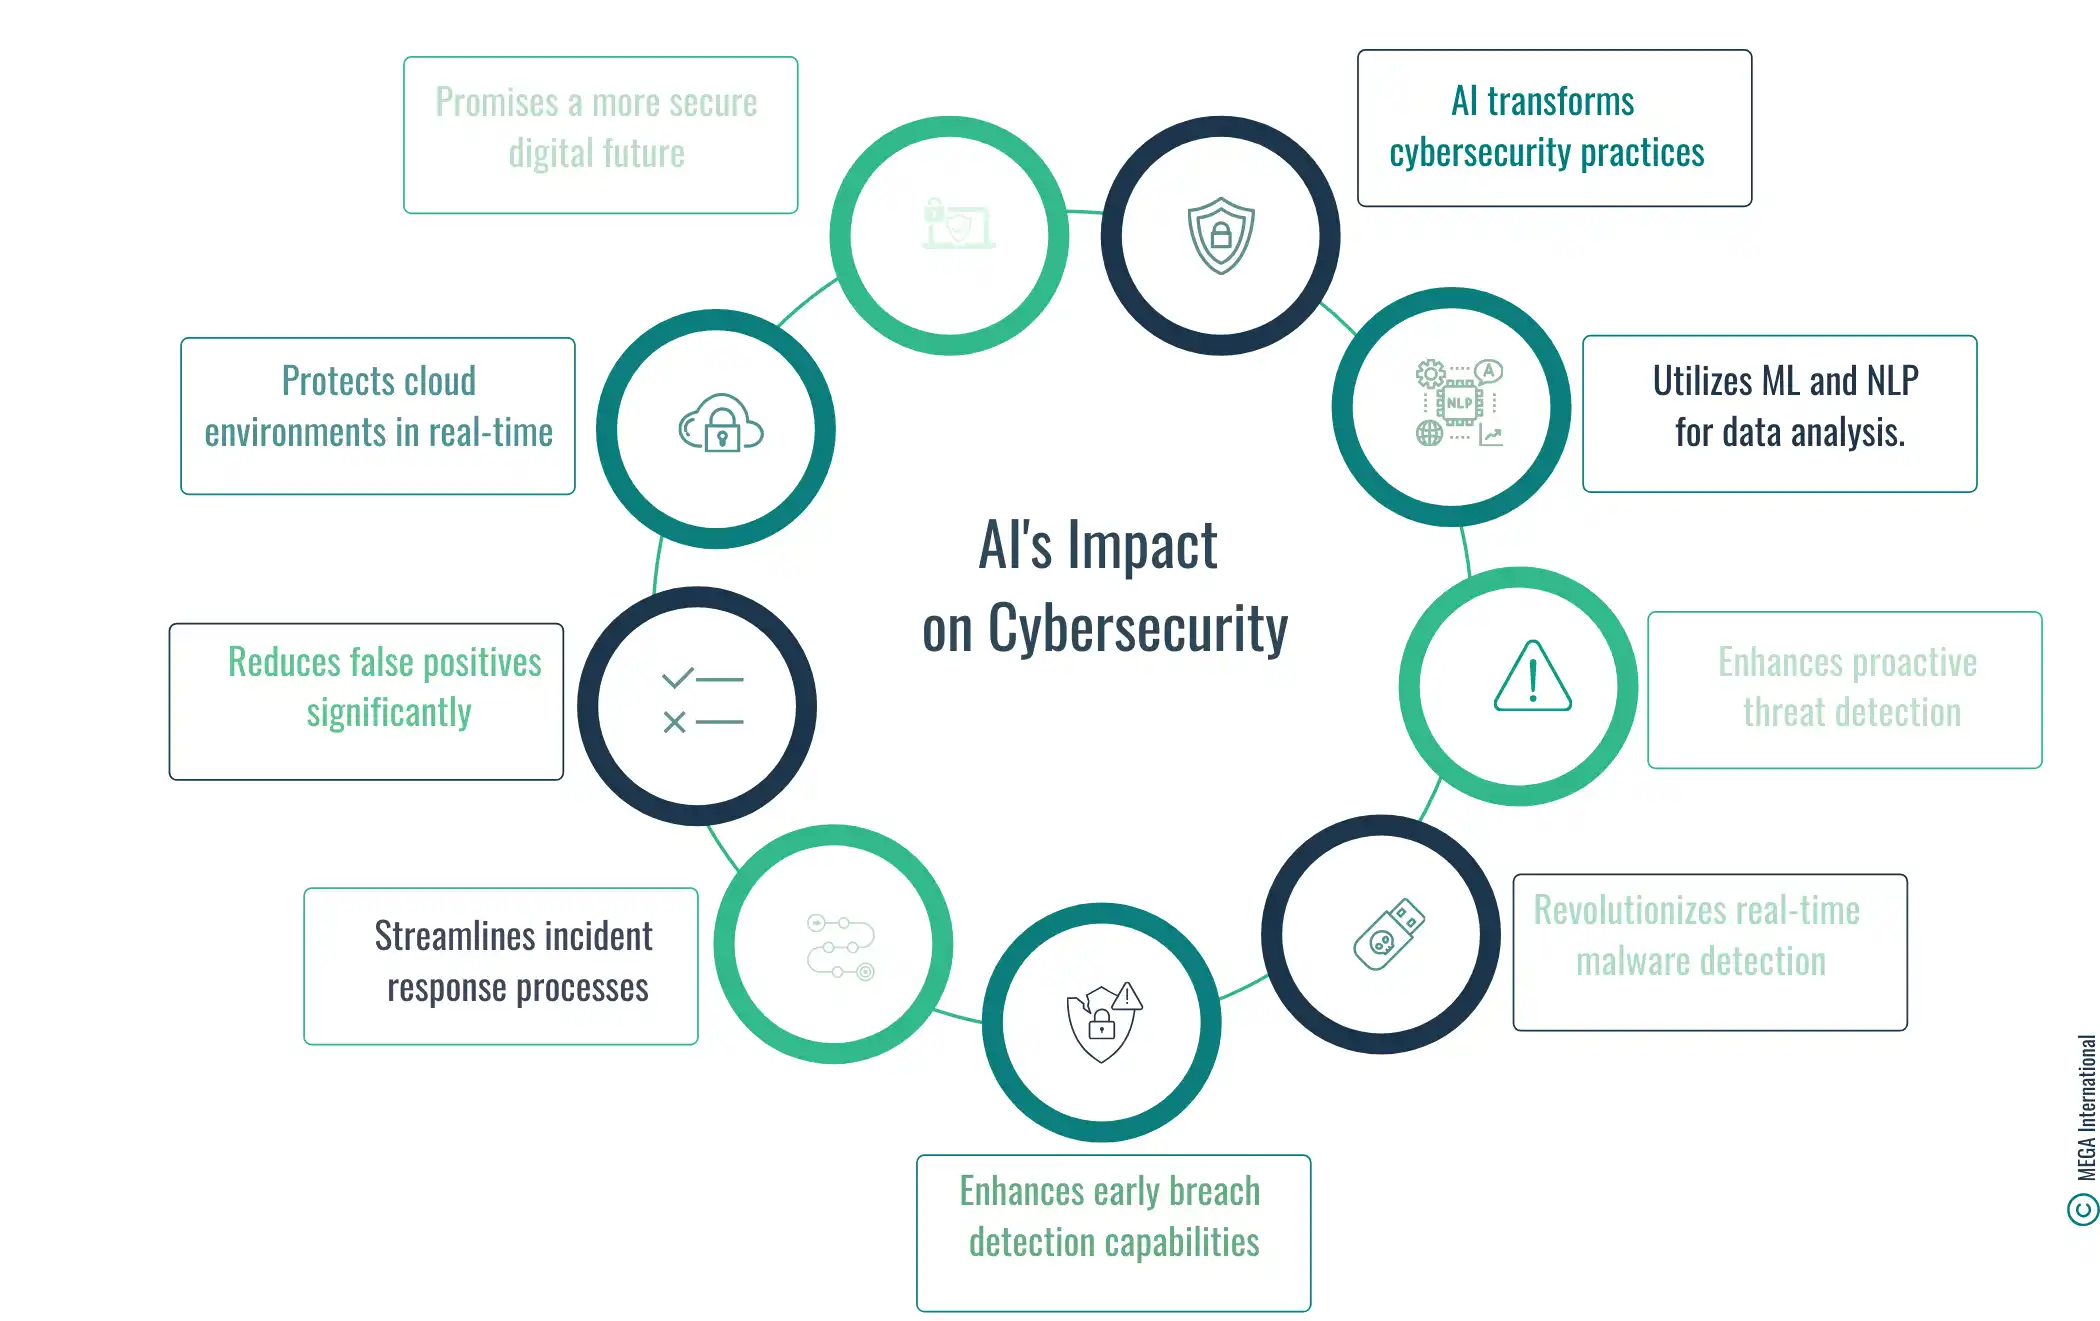 How is AI Impacting Cybersecurity?